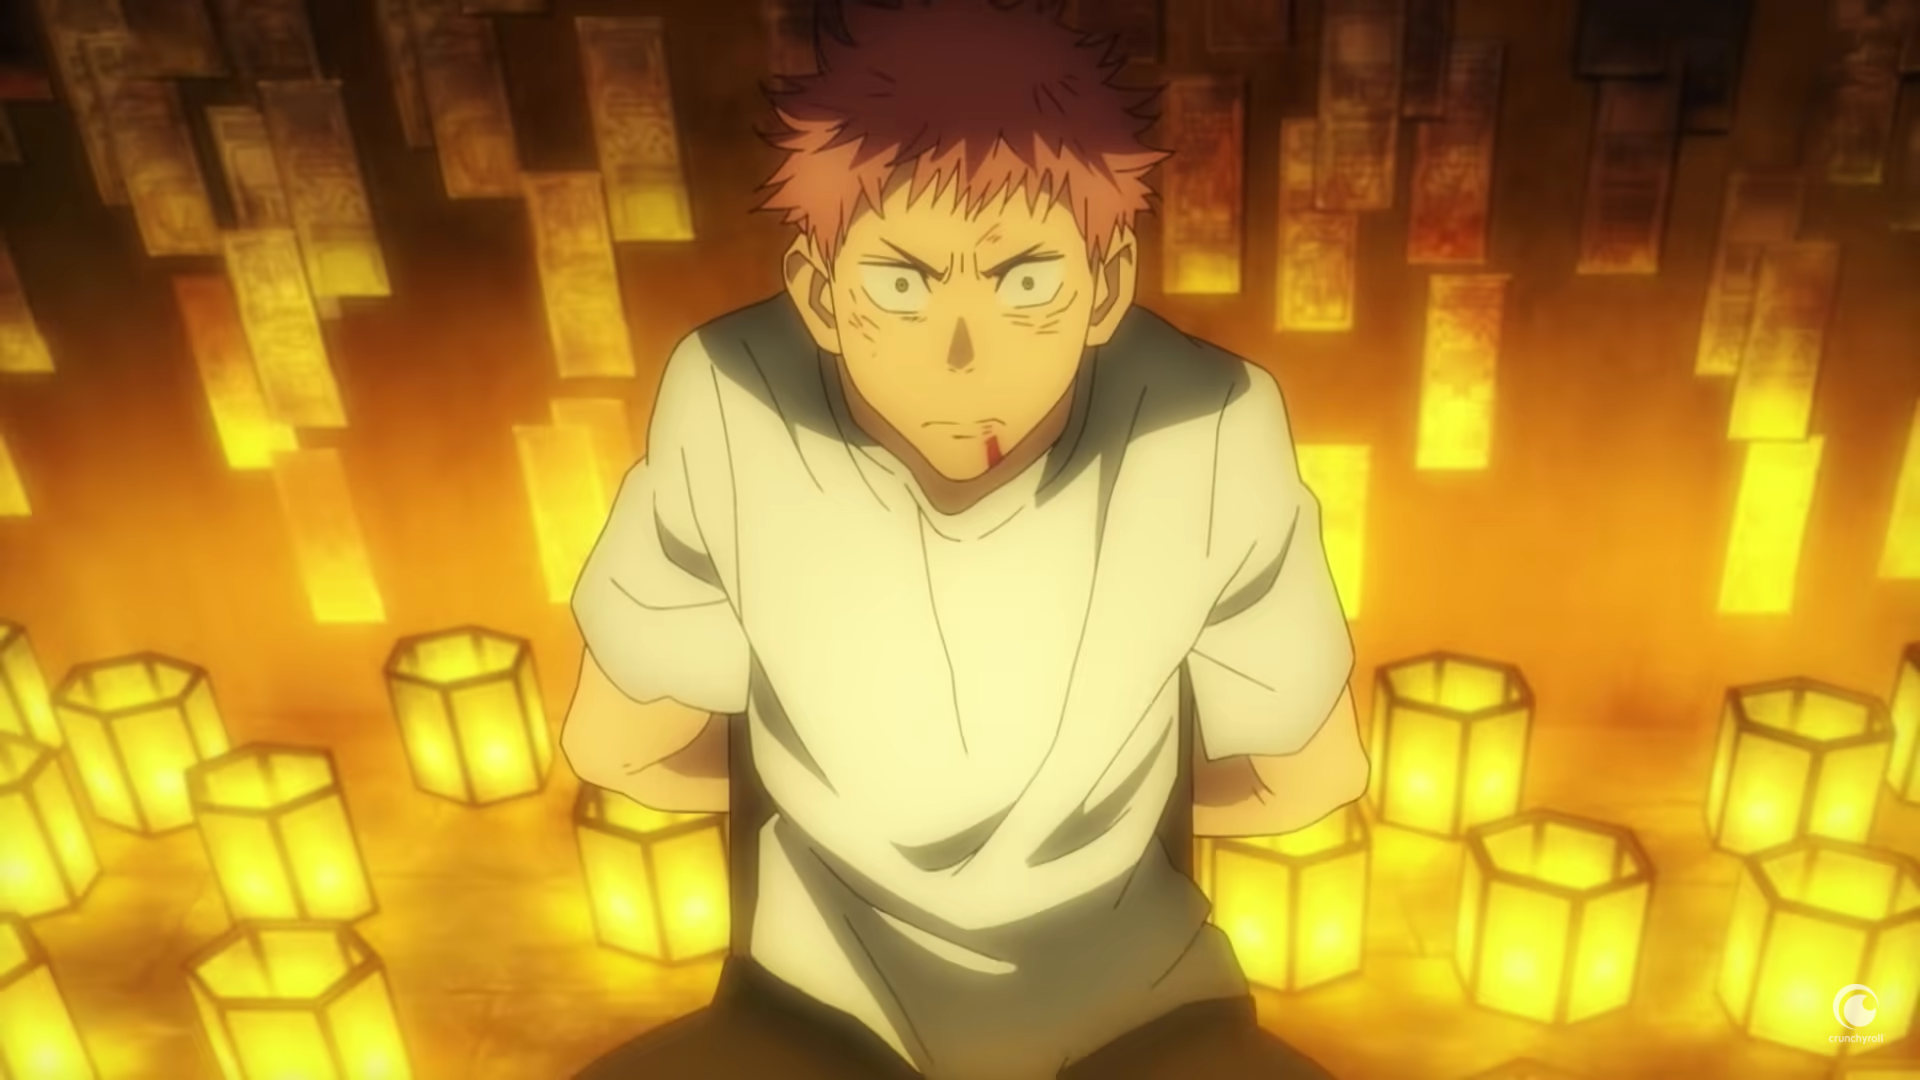 Is Jujutsu Kaisen Season 2 on Crunchyroll, Netflix, Hulu, or Funimation in English Sub or Dub? Where to Watch and Stream the Latest Episodes Free Online